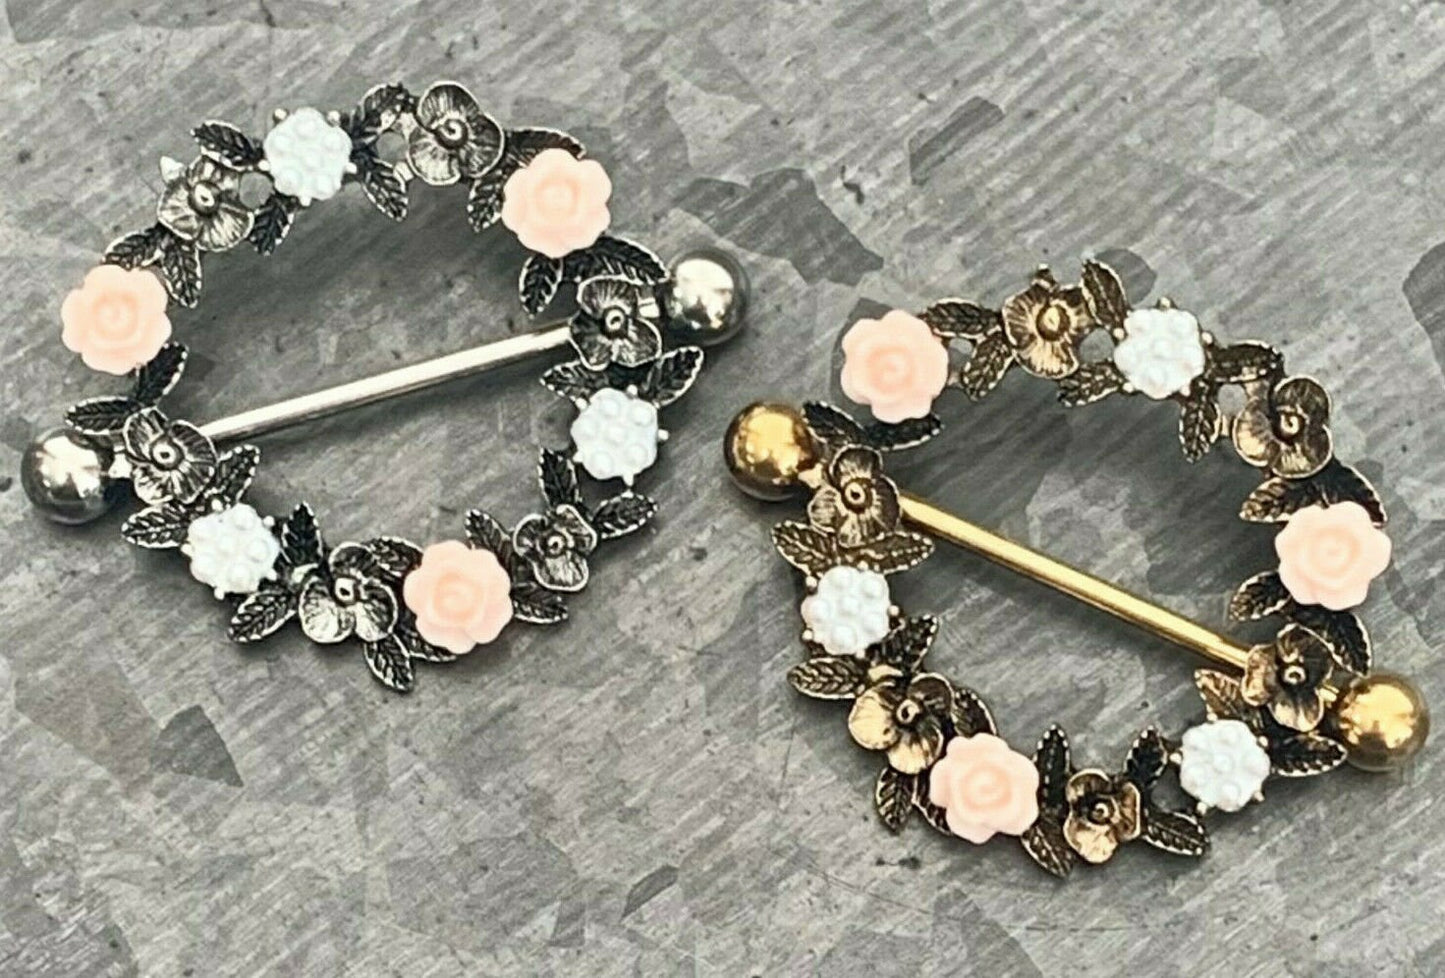 PAIR of Stunning Floral Wreath Steel Barbell Nipple Ring/Shields - Wearable Length 14mm - Barbell Length 28mm - Silver and Gold available!